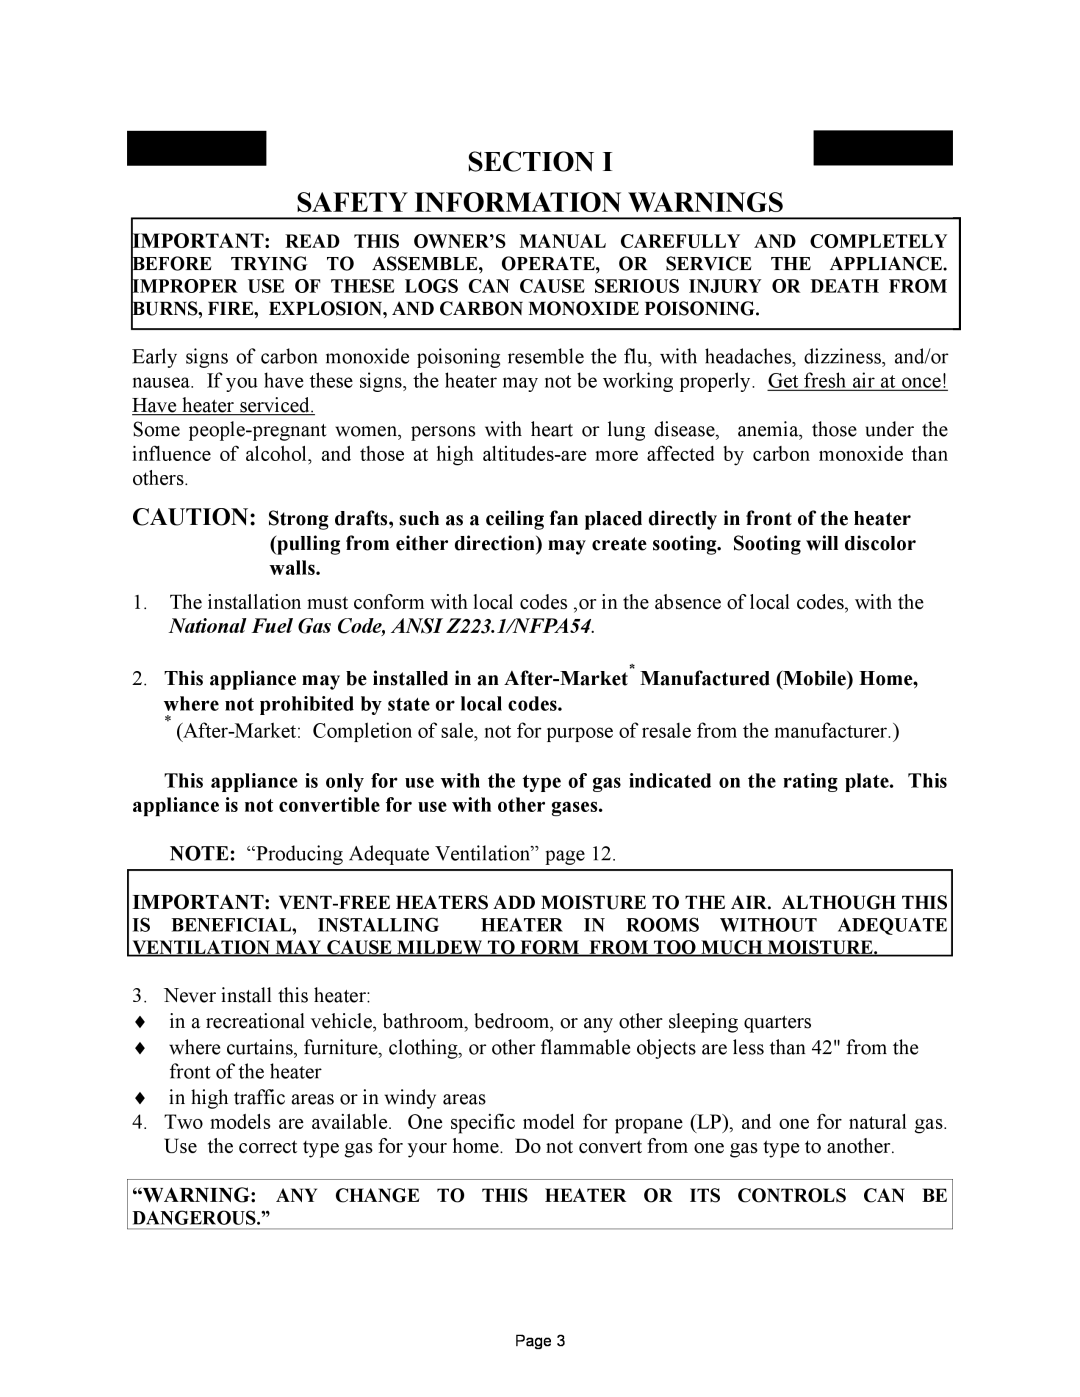 New Buck Corporation 32 manual Section Safety Information Warnings 